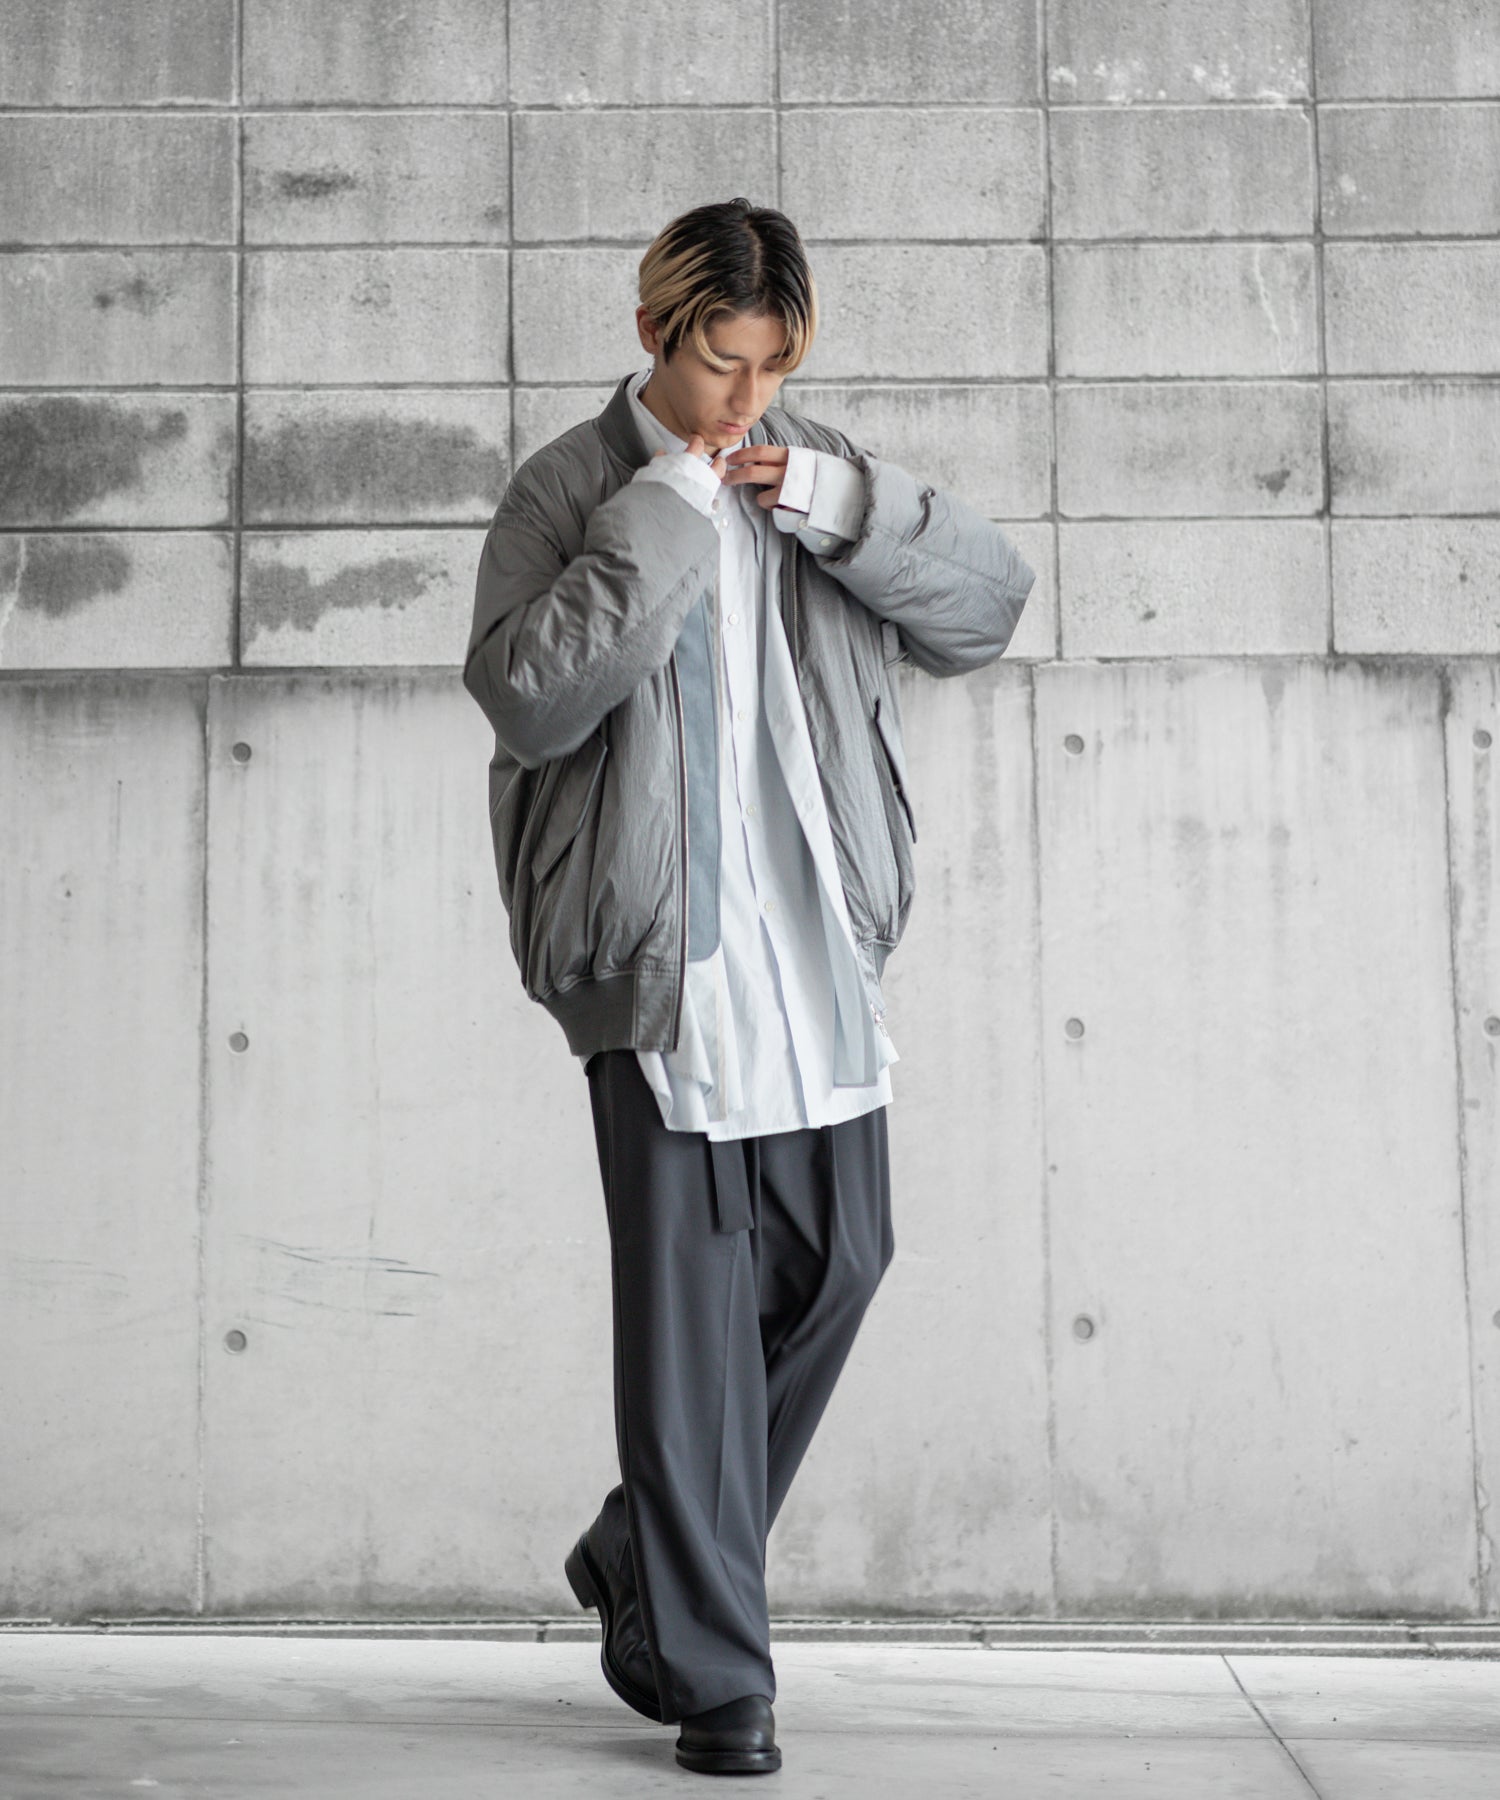 ATTACHMENT(アタッチメント)のPE/RY STRETCH TROPICAL BELTED WIDE TROUSERSのD.GRAY